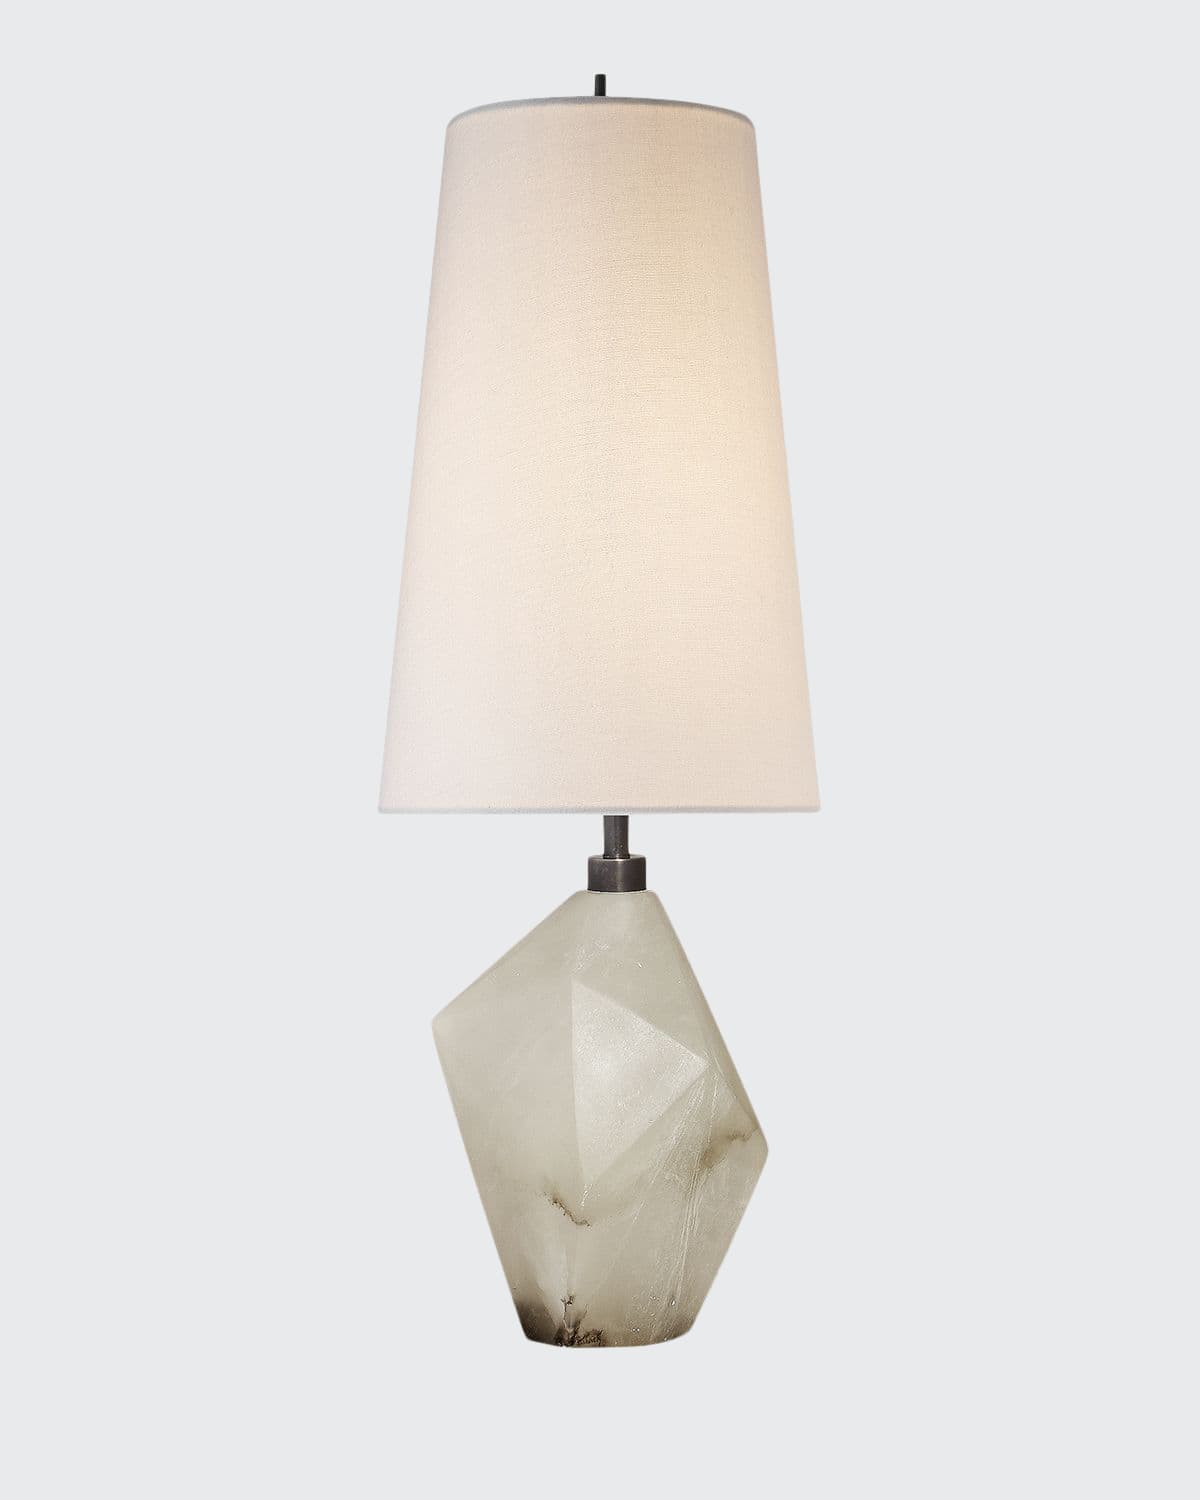 Kelly Wearstler For Visual Comfort Signature Halcyon Accent Table Lamp In Alabaster